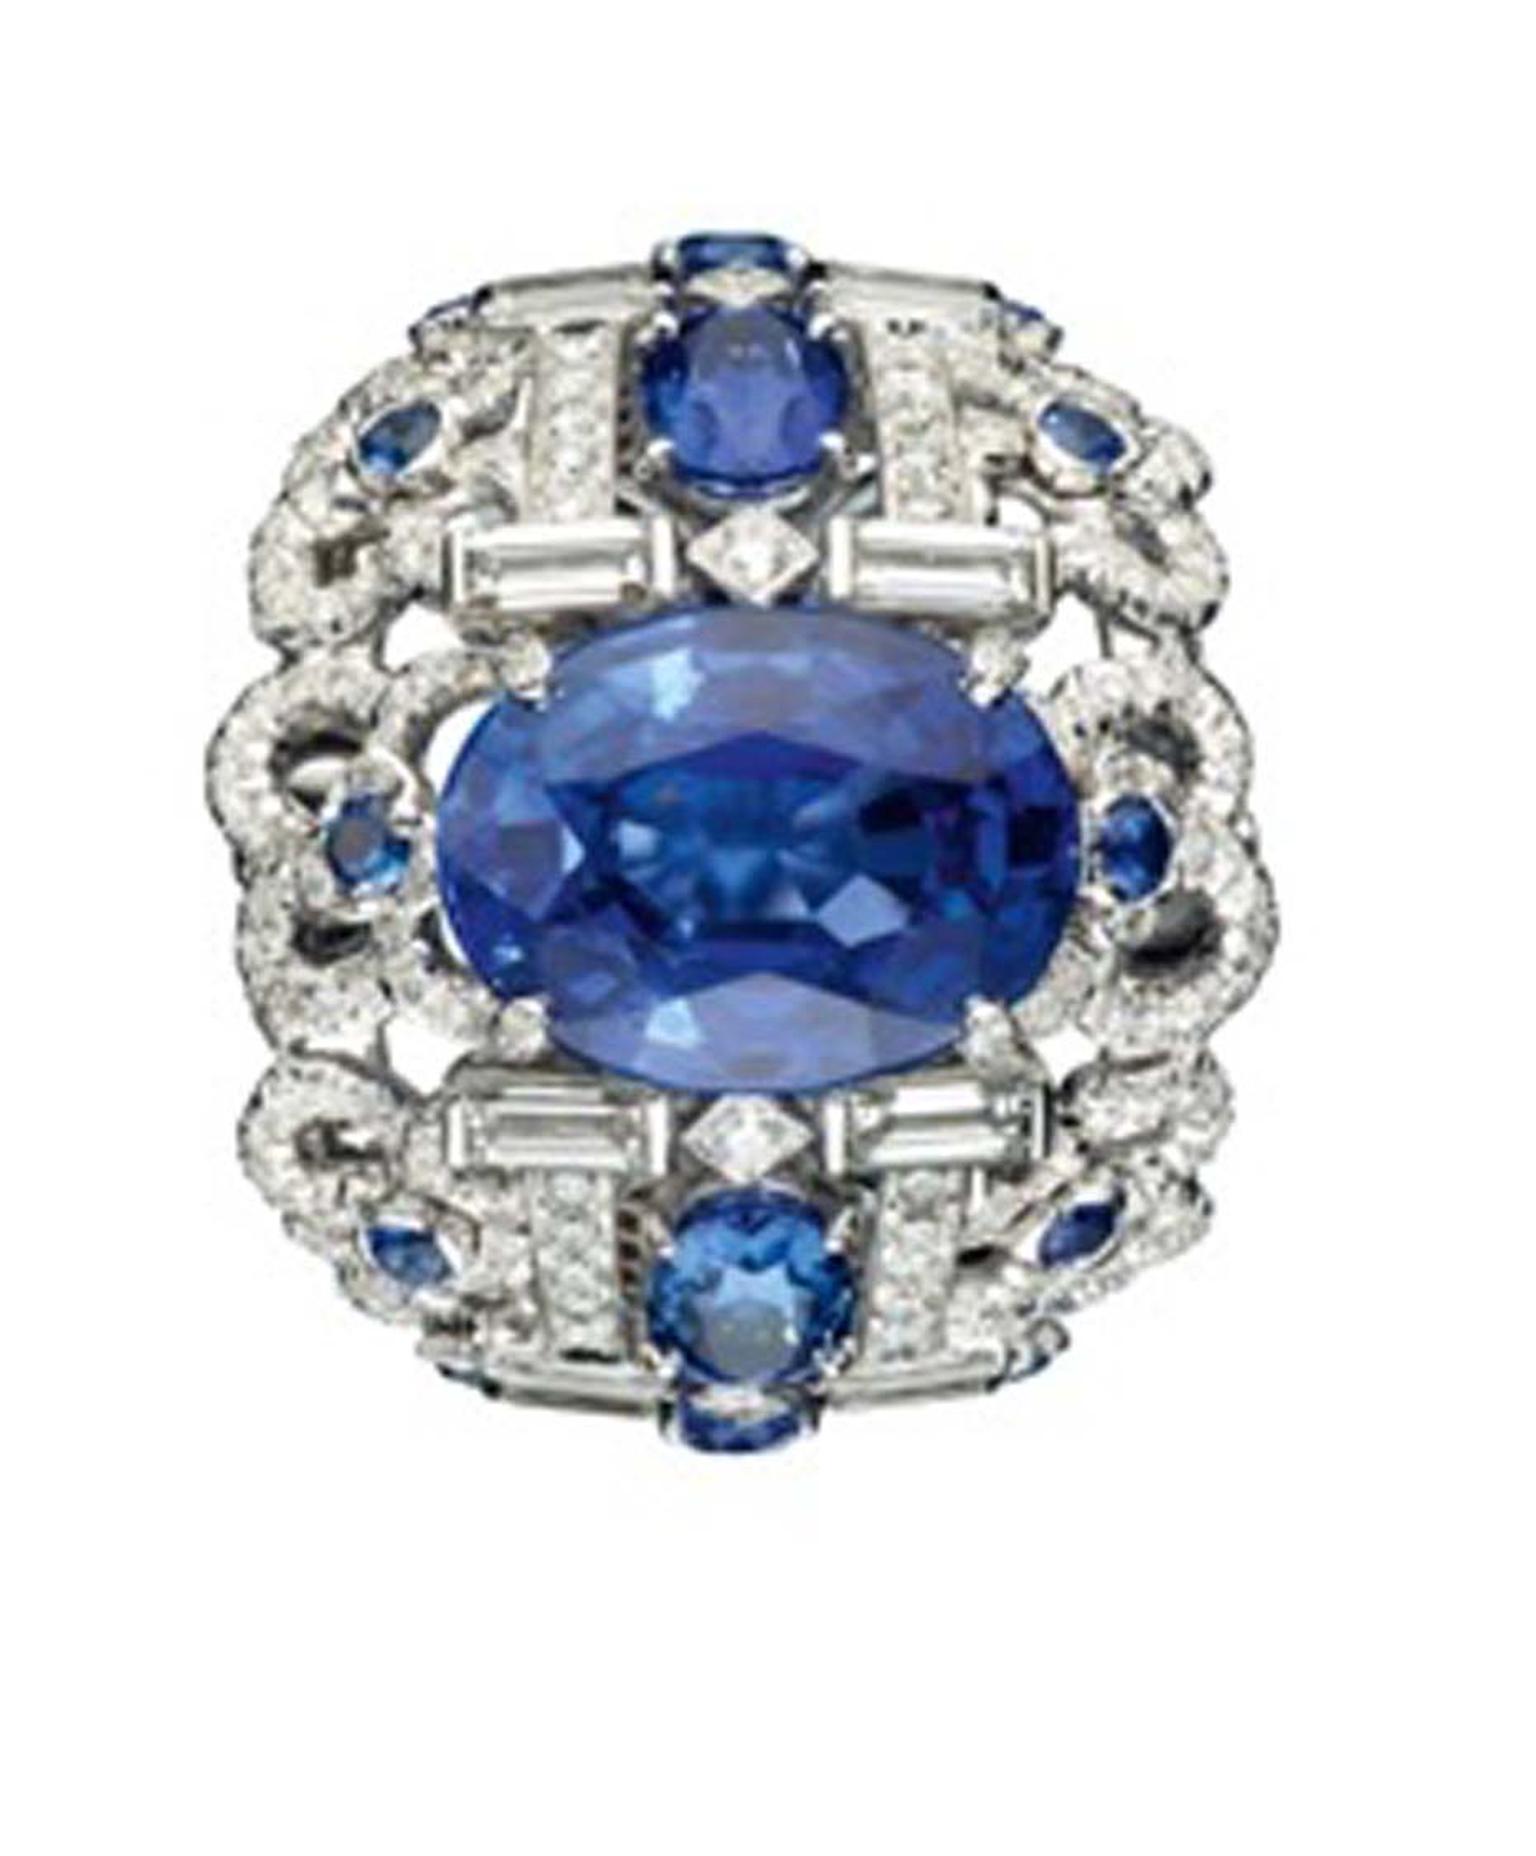 Chaumet white gold Hortensia ring with diamonds, sapphires and set with a centre oval-cut sapphire.